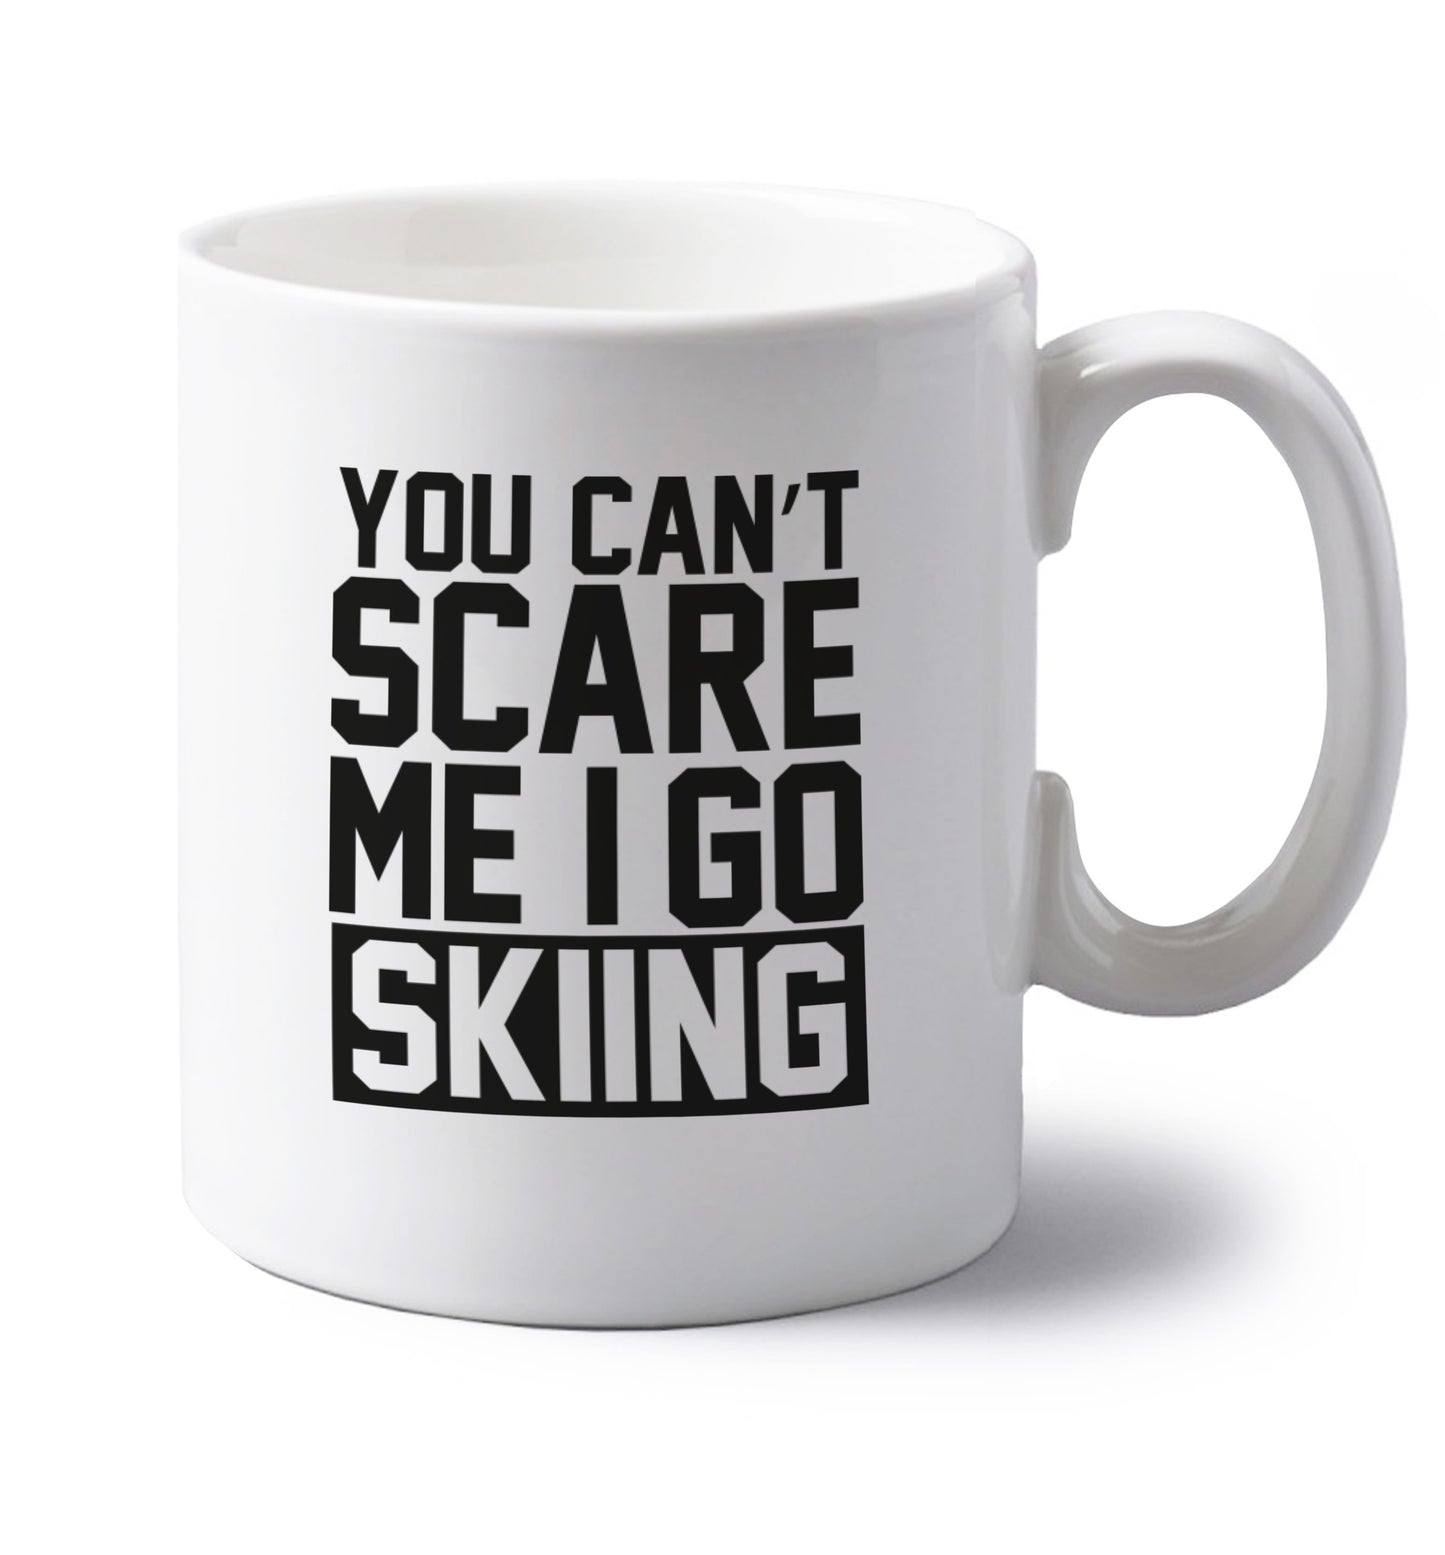 You can't scare me I go skiing left handed white ceramic mug 